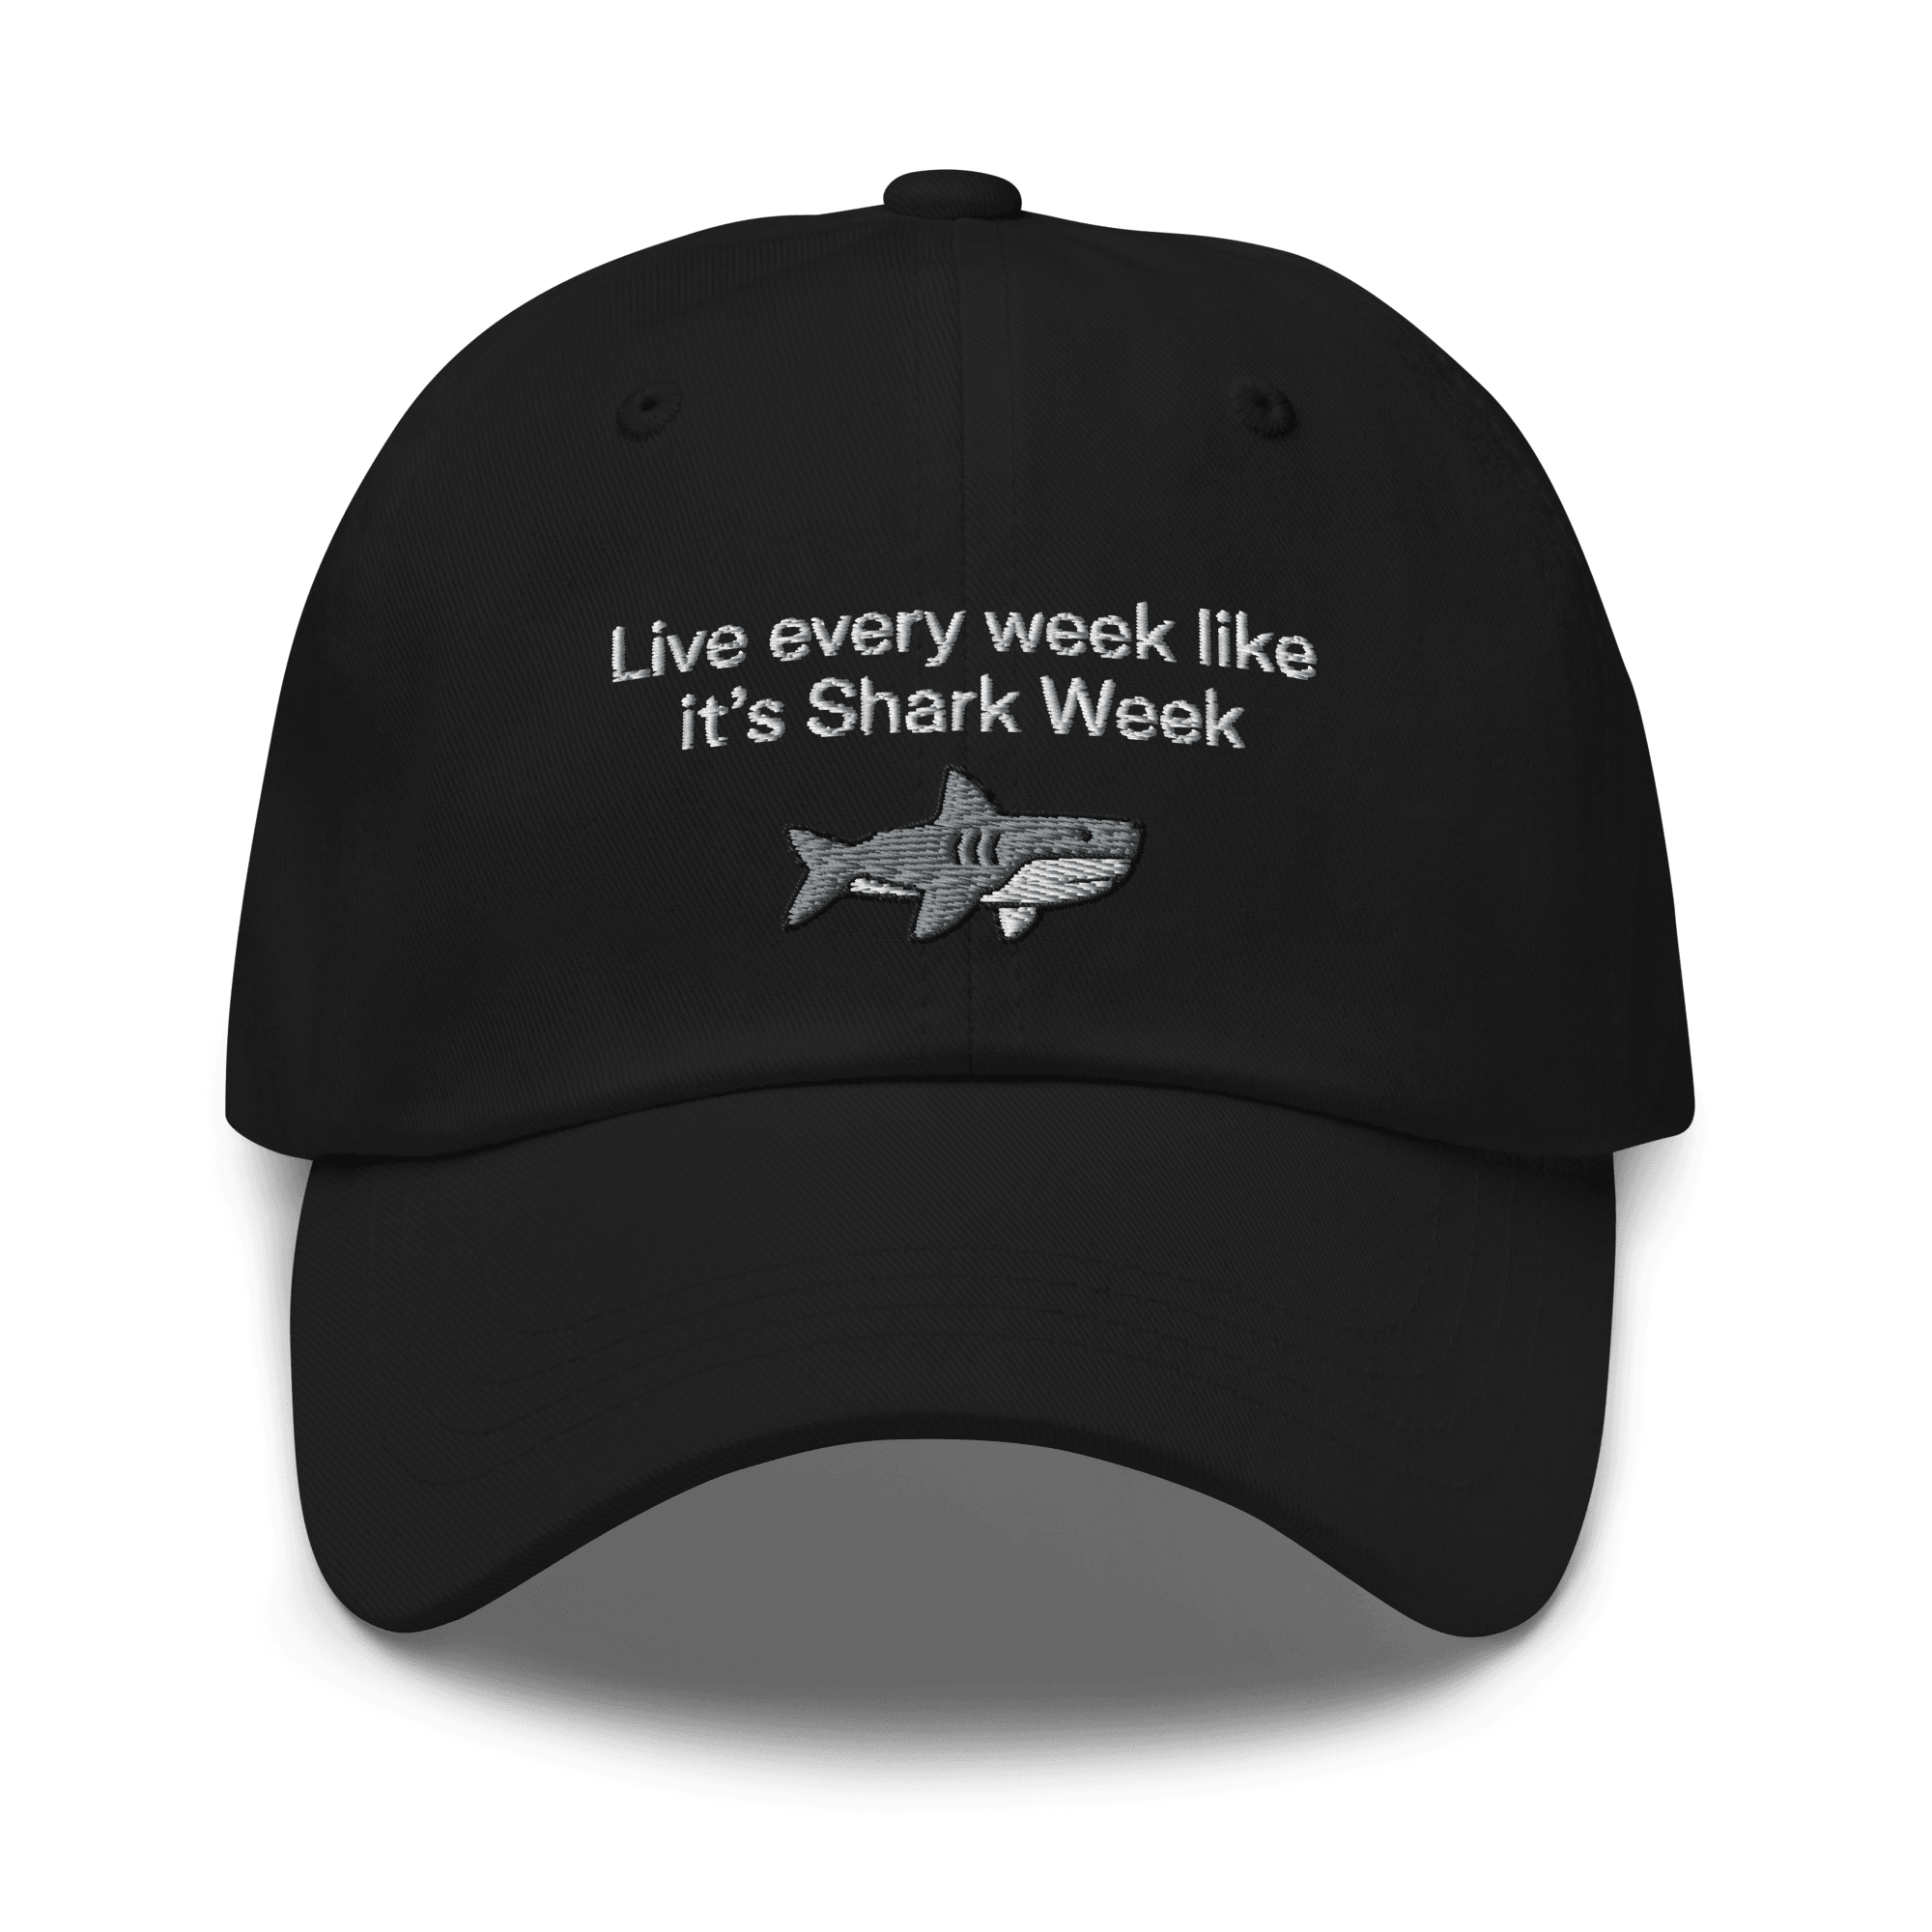 Live every week like it's Shark Week Embroidered Hat - Polychrome Goods 🍊